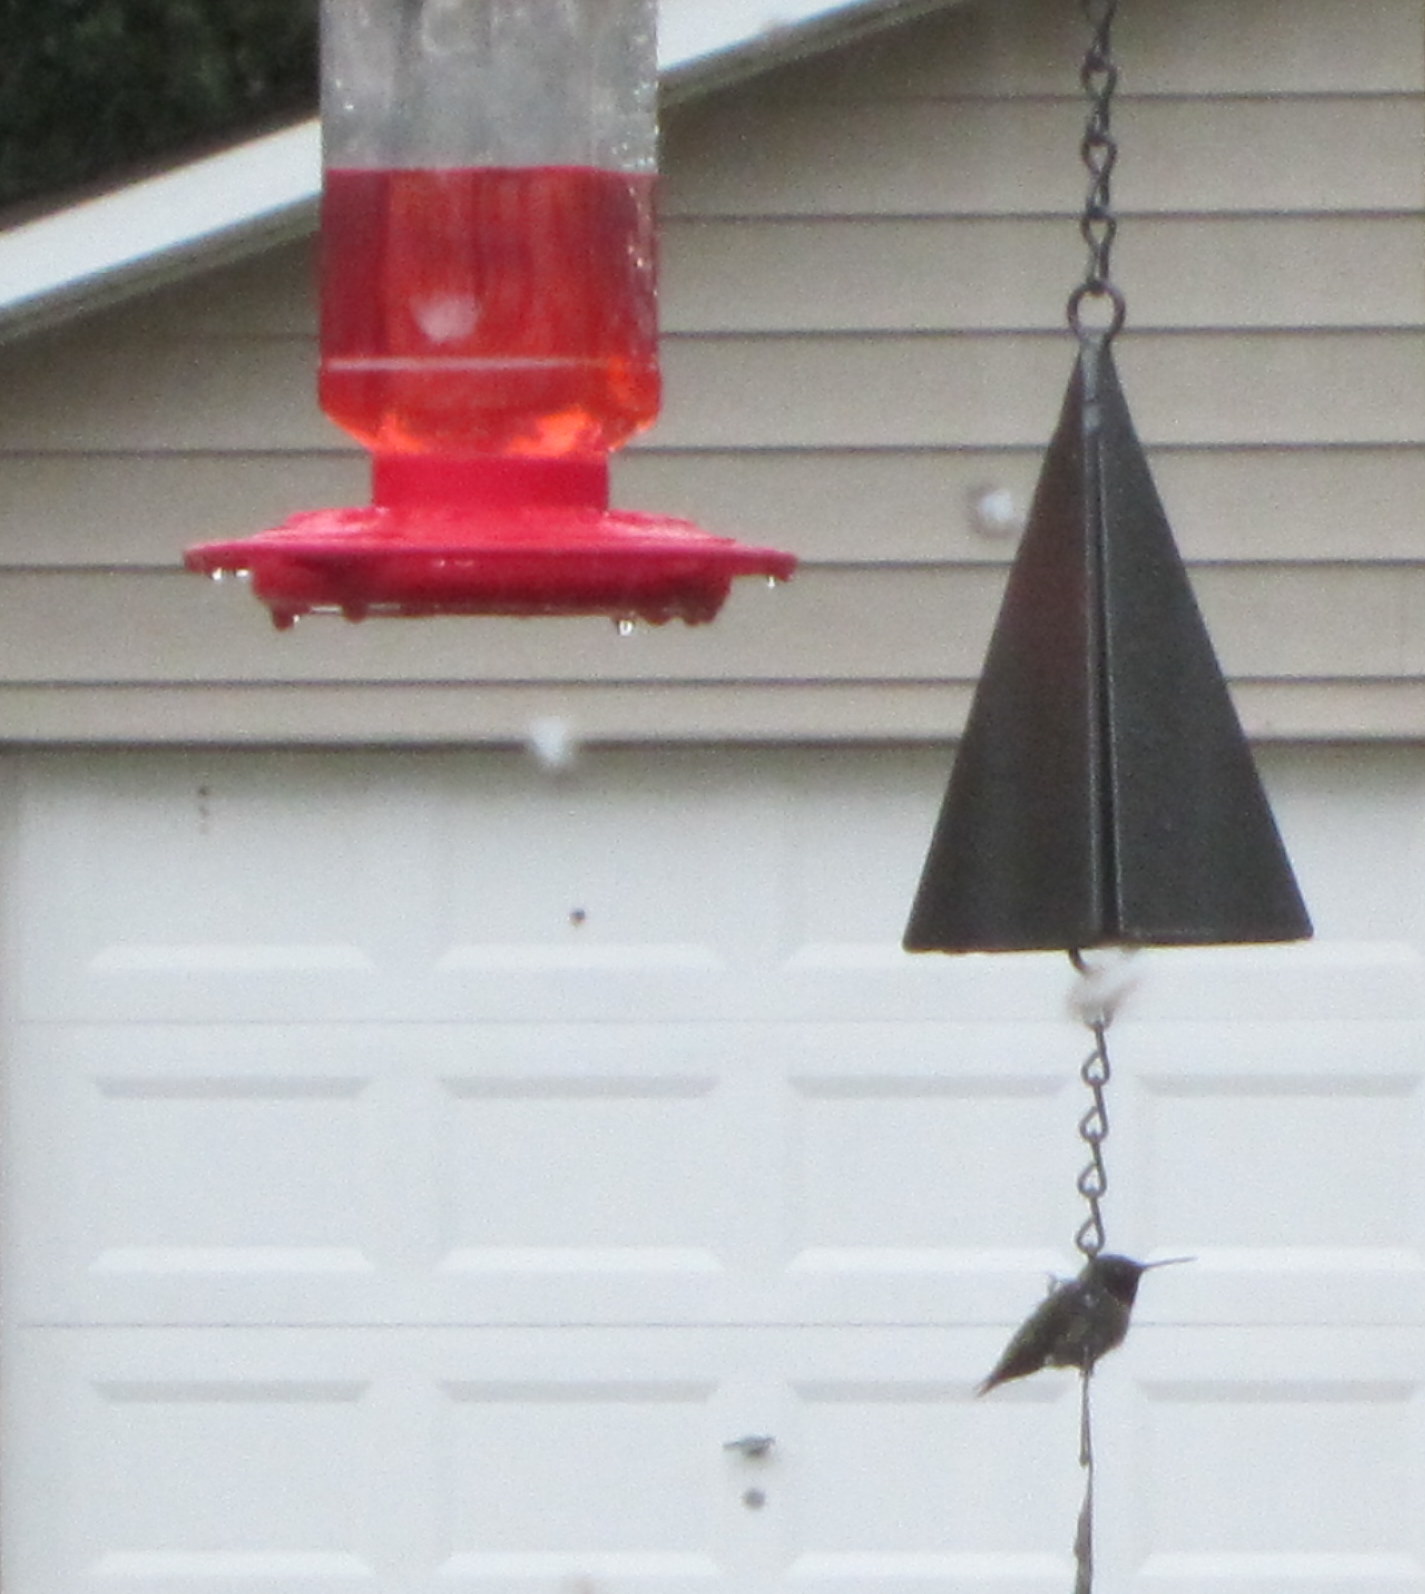 So many hummingbird feeders have trumpet shaped openings